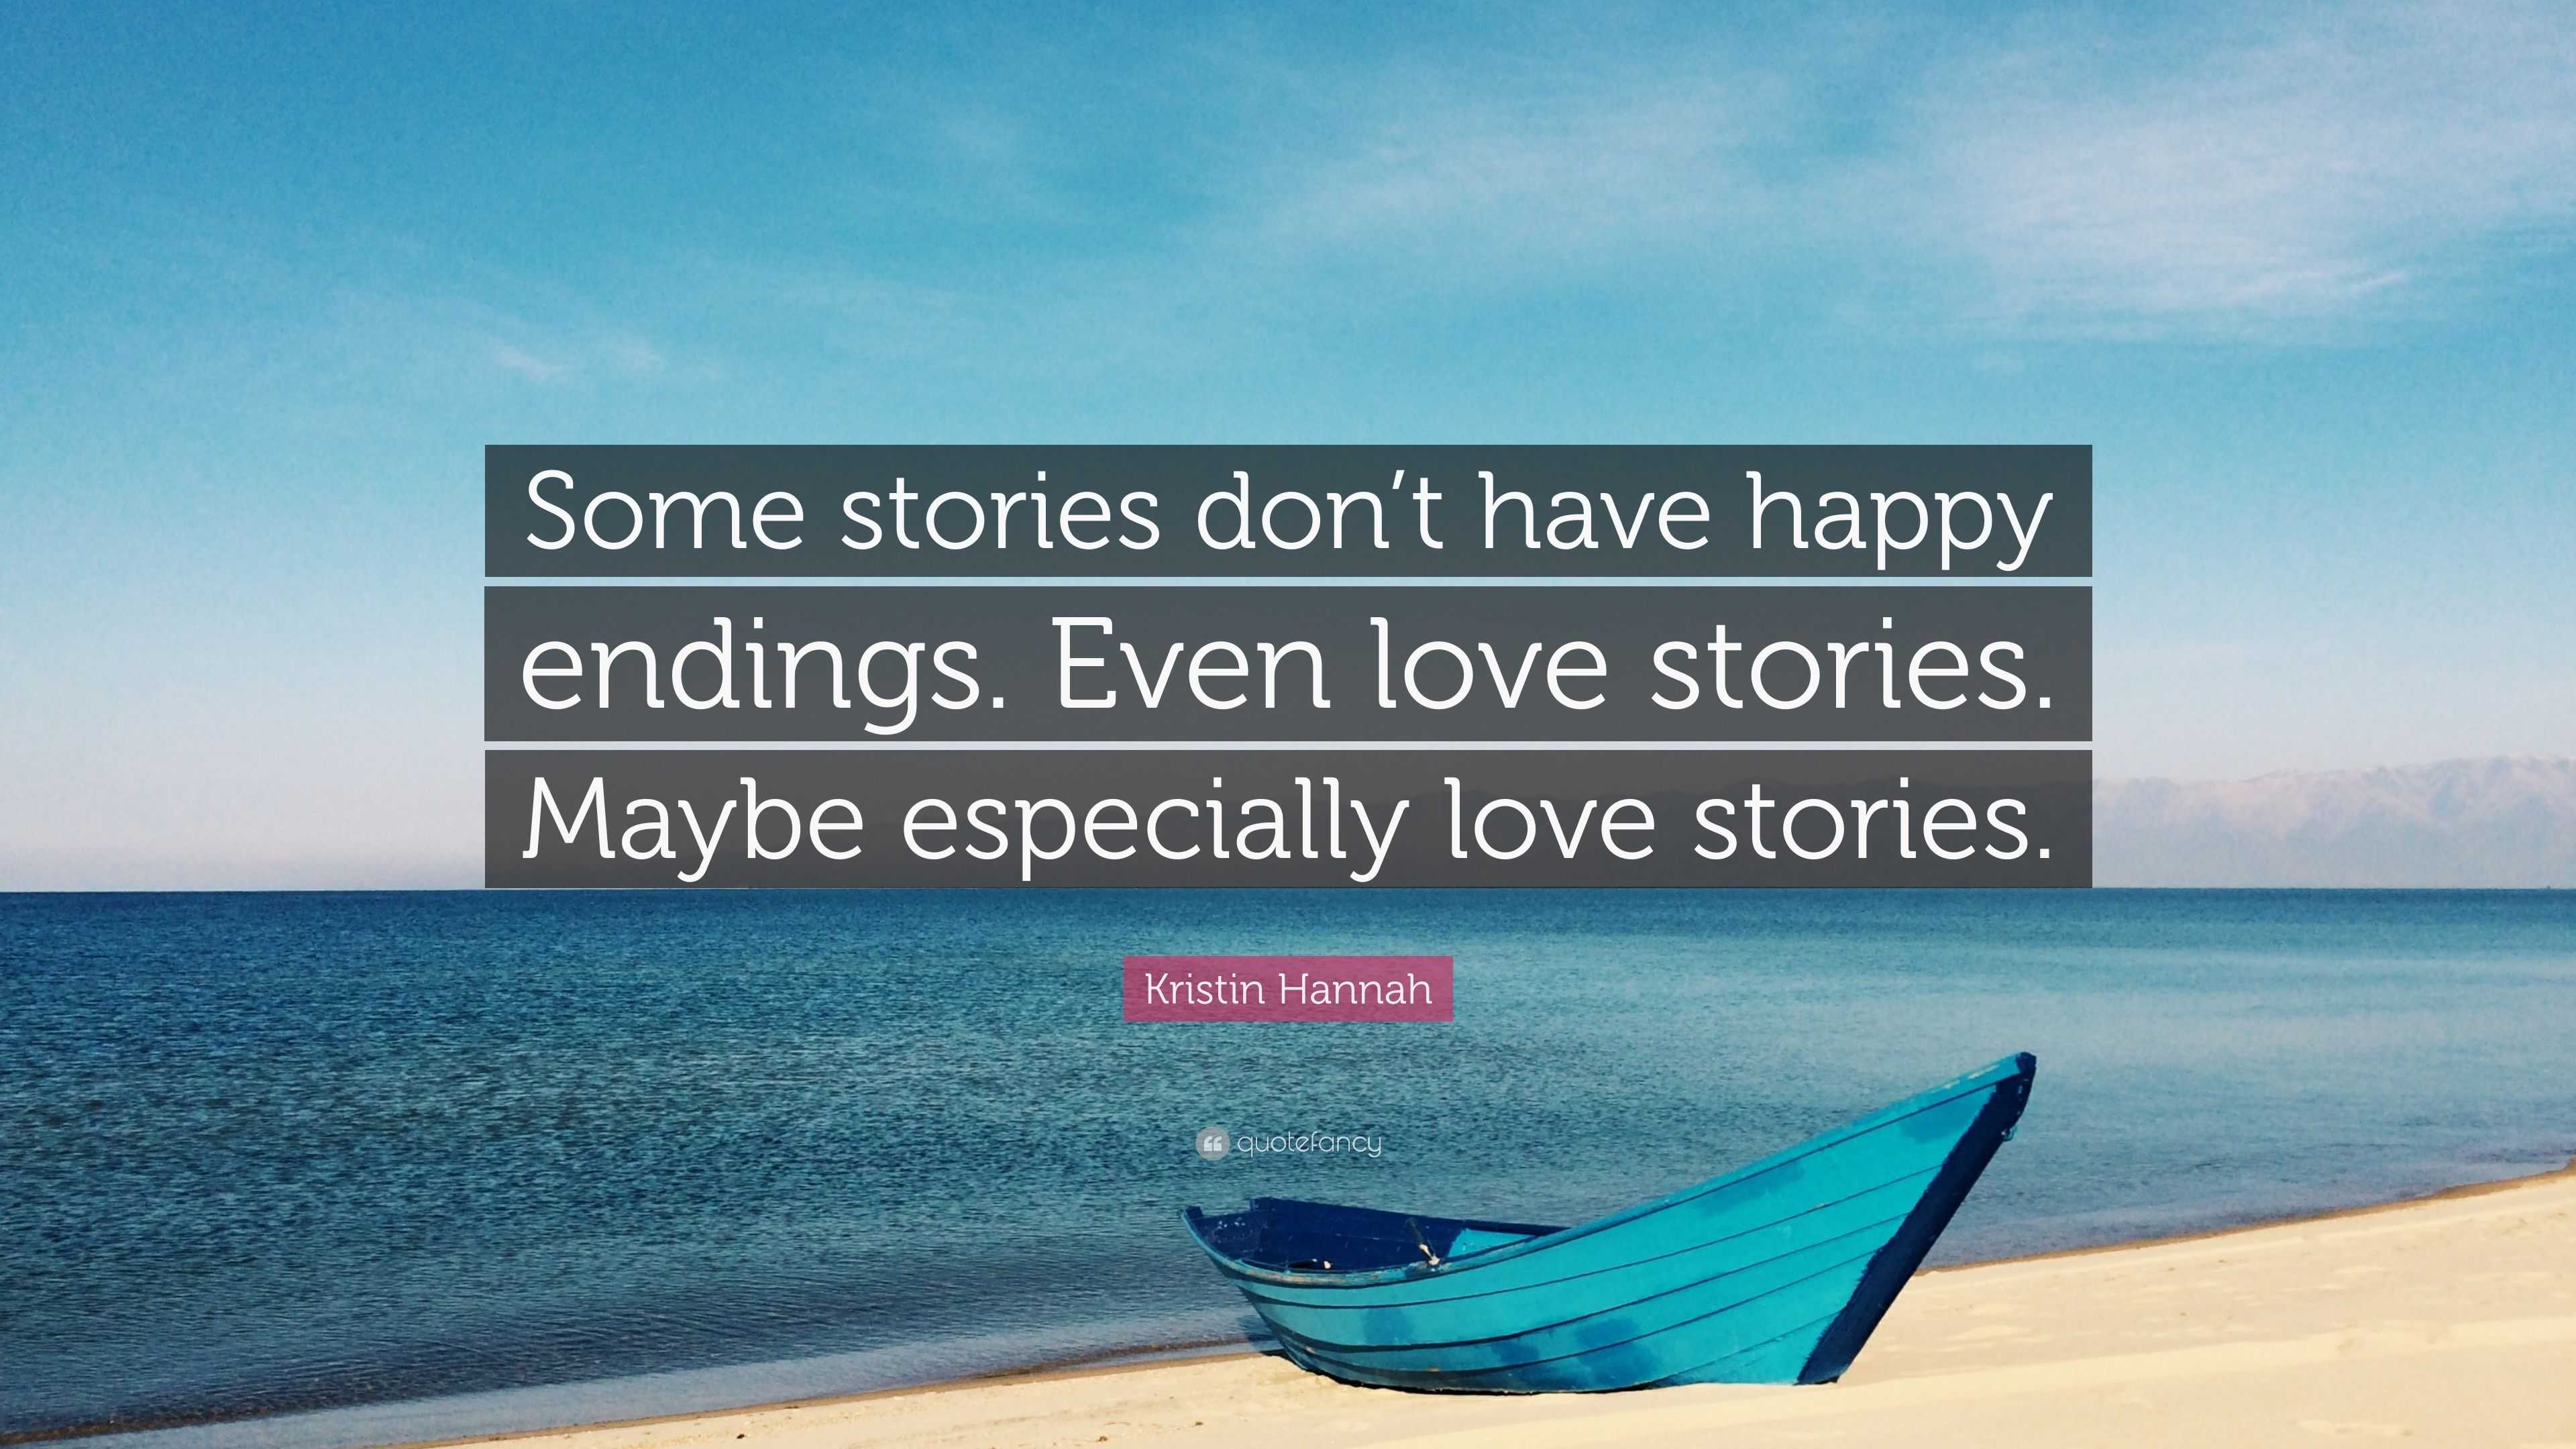 Kristin Hannah Quote: “Some stories don’t have happy endings. Even love